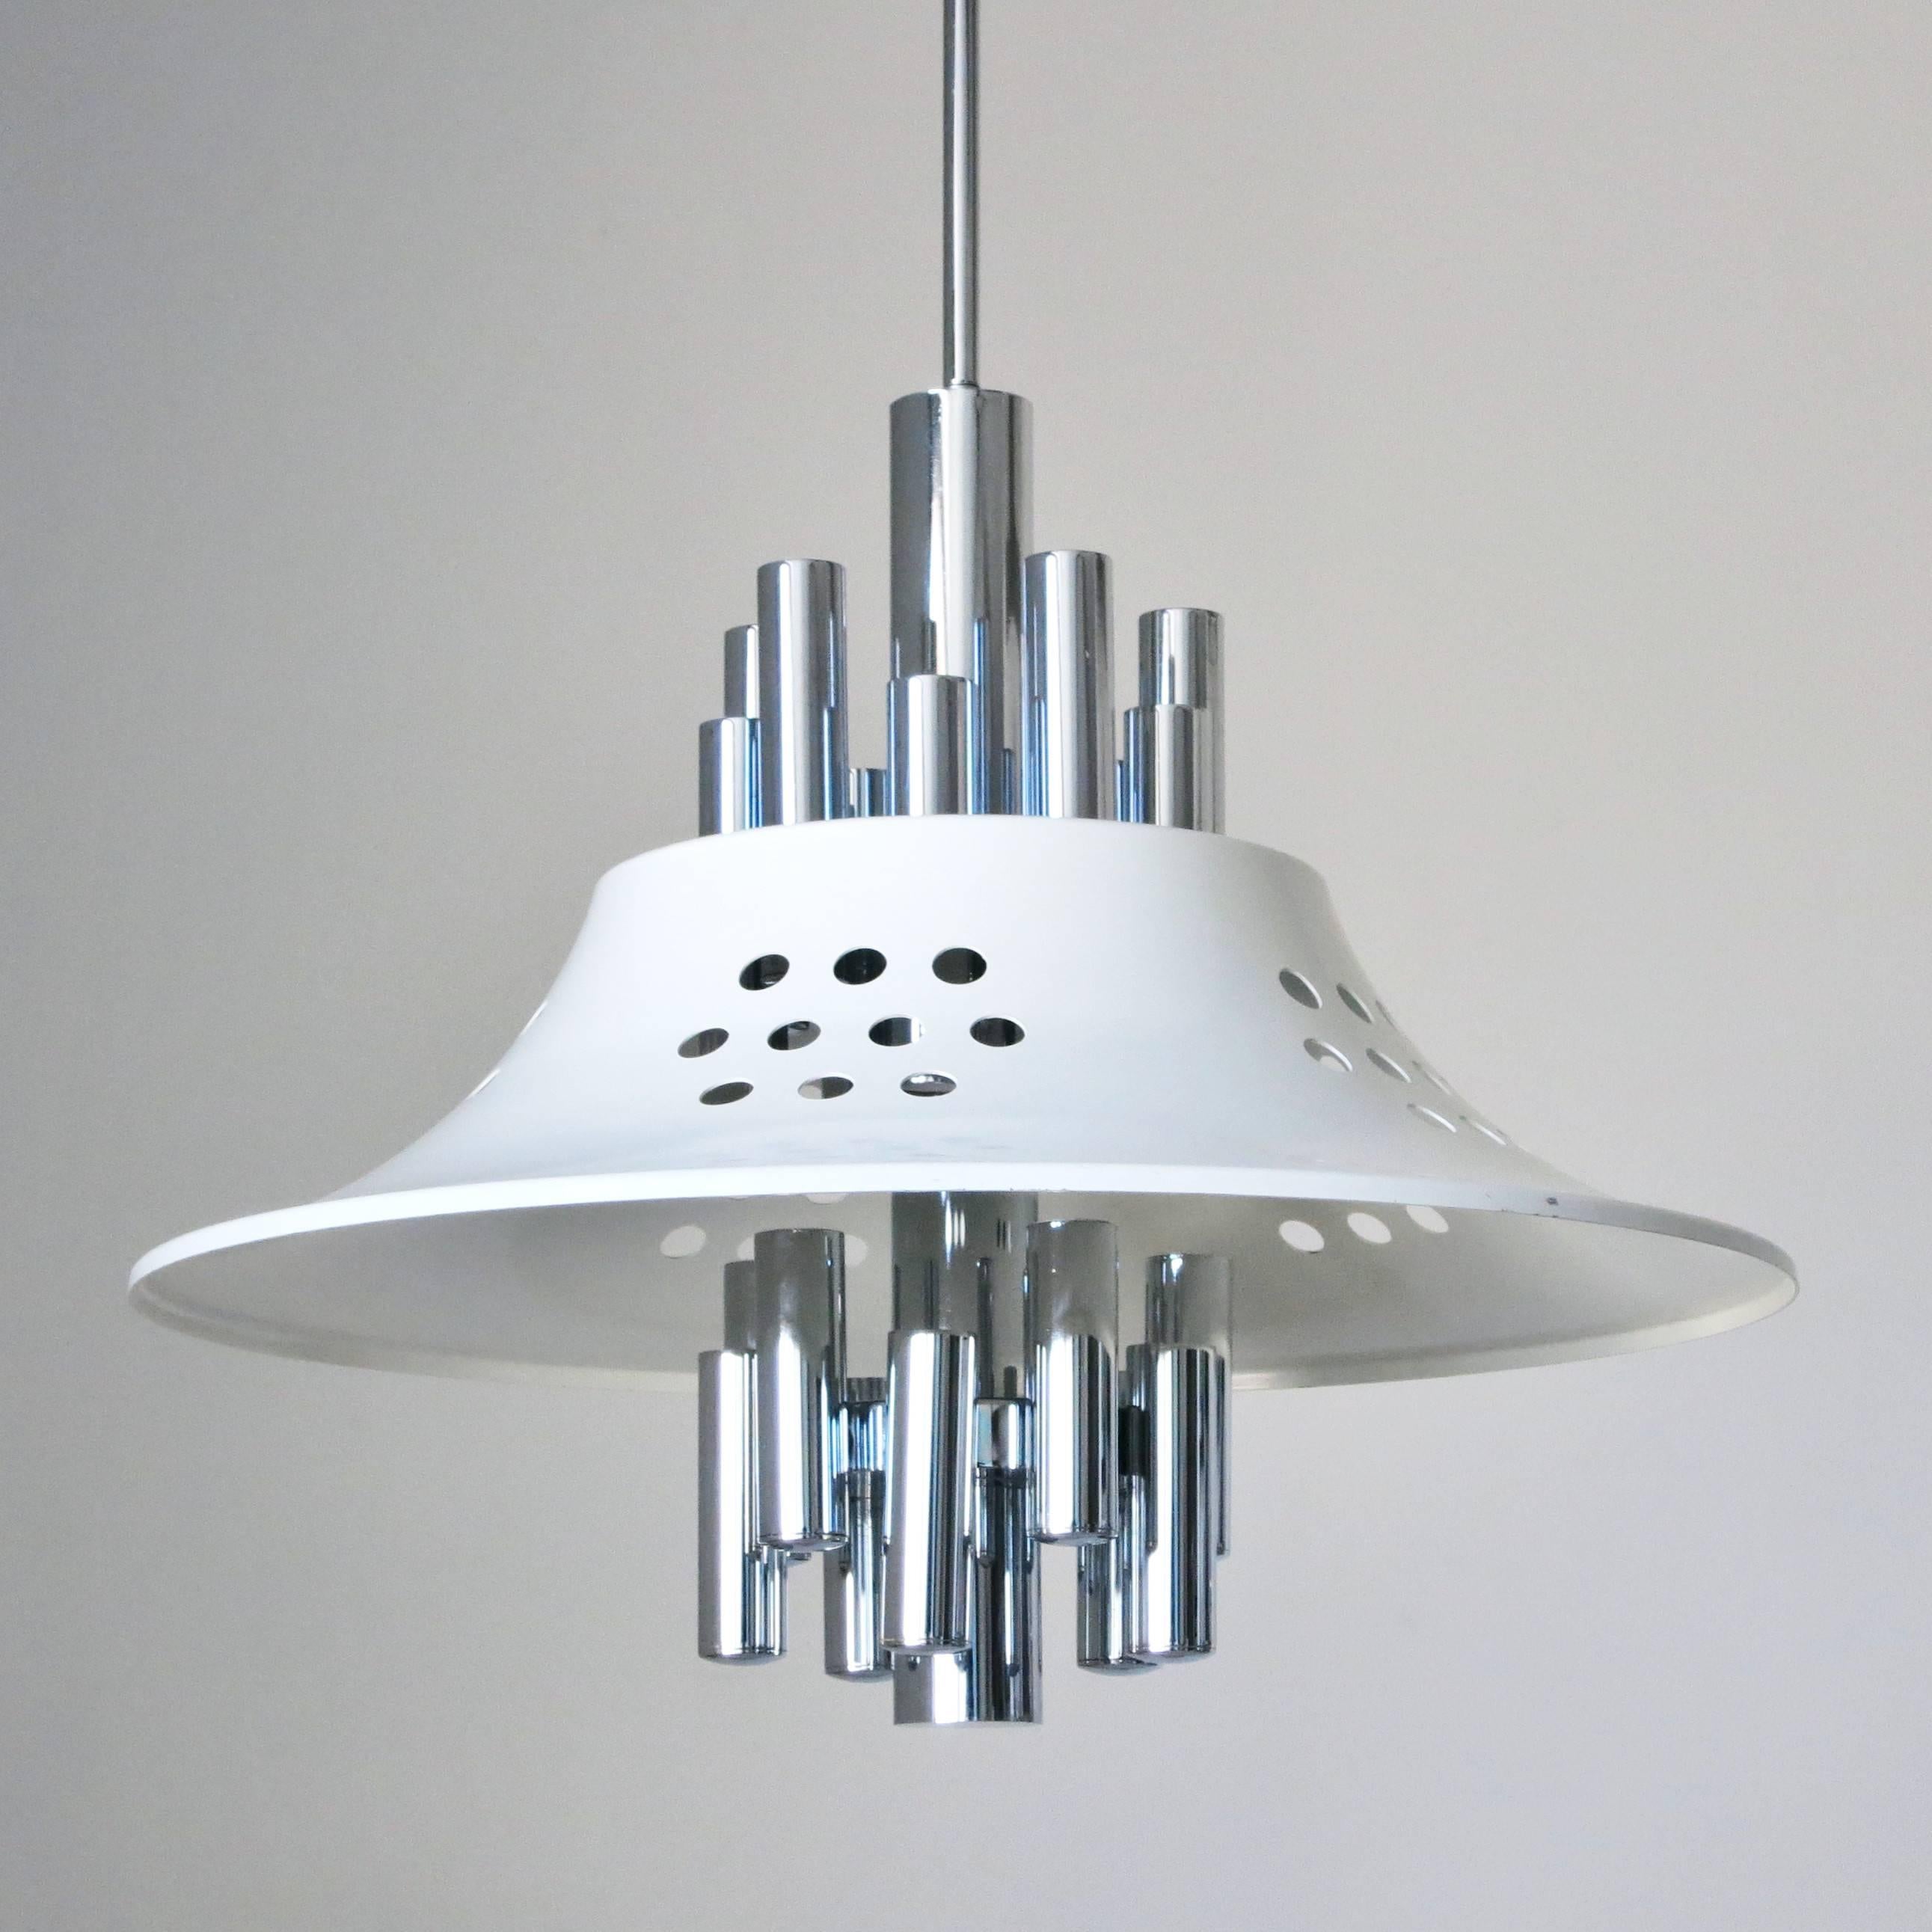 Vintage Italian pendant in chrome and white enameled metal shades / Designed by Sciolari circa 1970’s / Made in Italy 
10 lights / E12 type / max 40W each
Diameter: 22 inches / Height: 41 inches including rod and canopy
1 in stock in Palm Springs